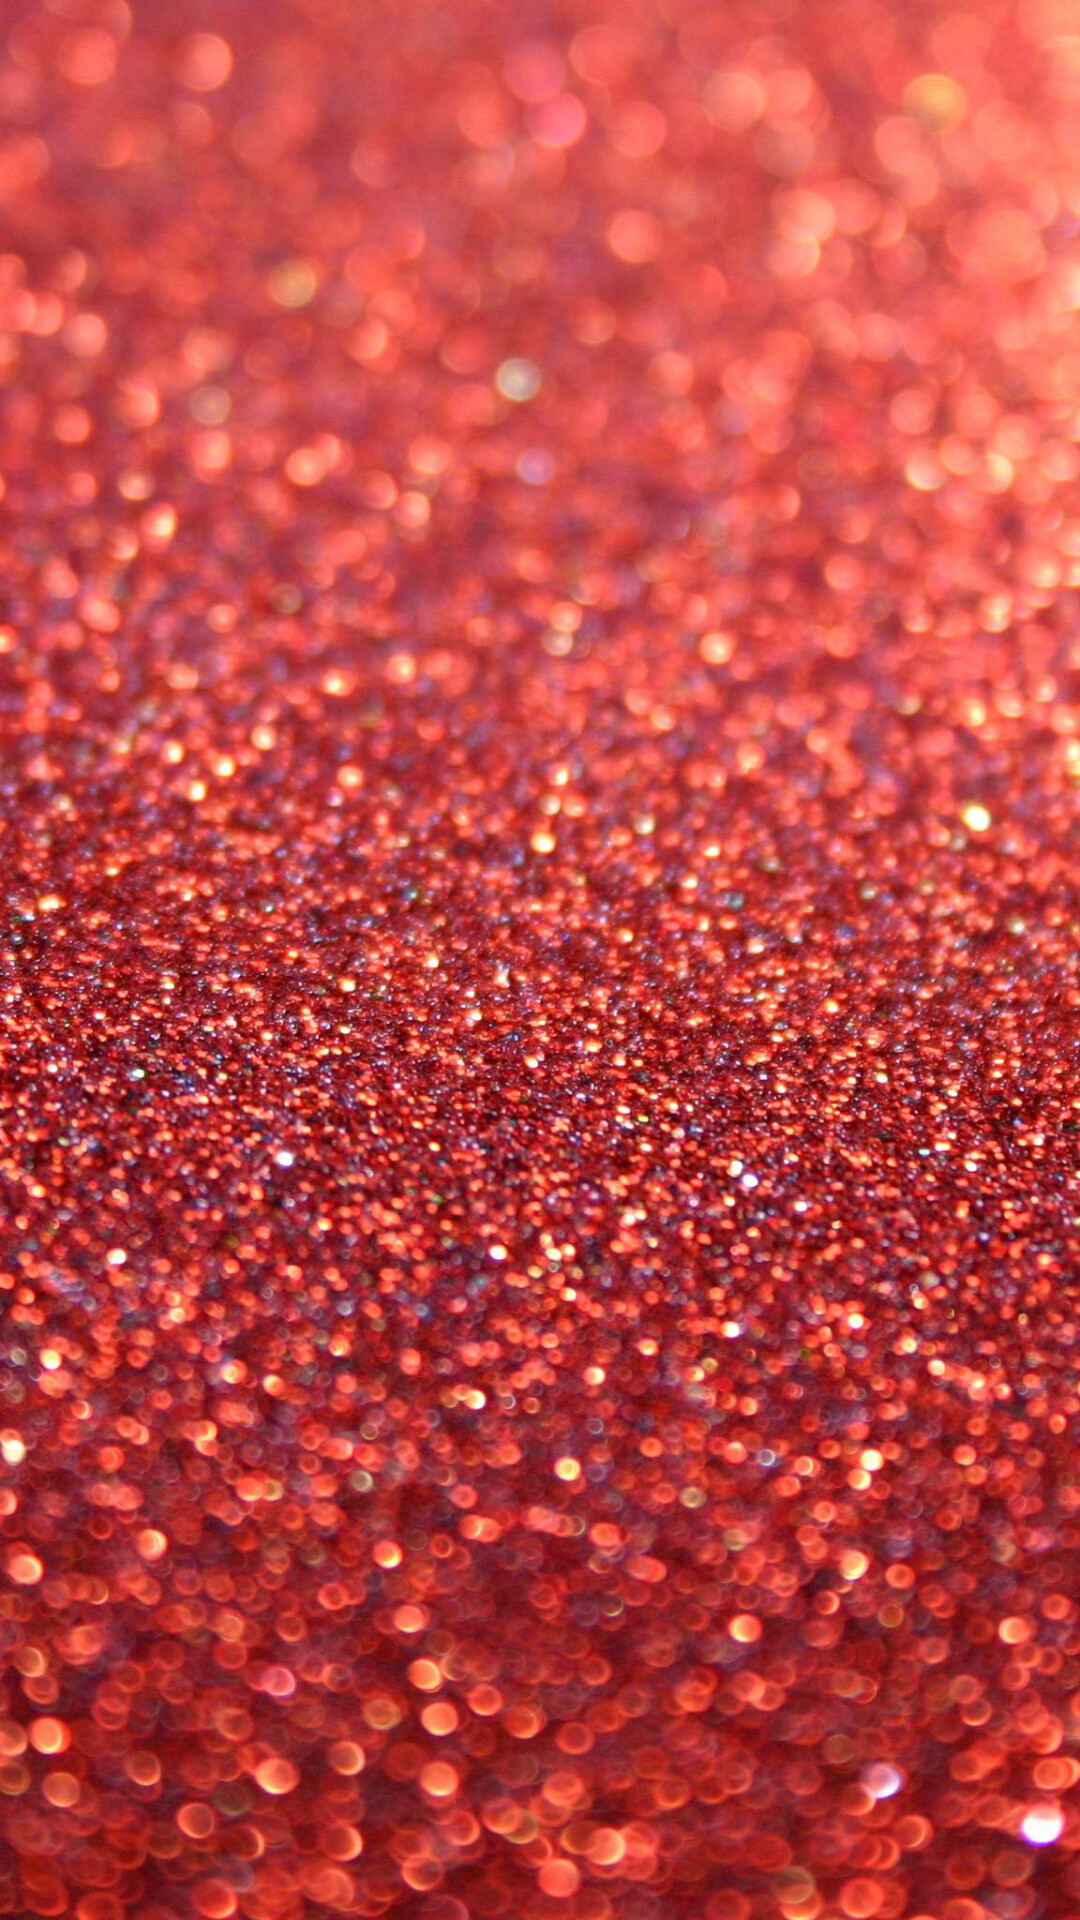 Red glitter shining, Glitter texture close-up, Sparkling glamour, Captivating sparkle, 1080x1920 Full HD Phone